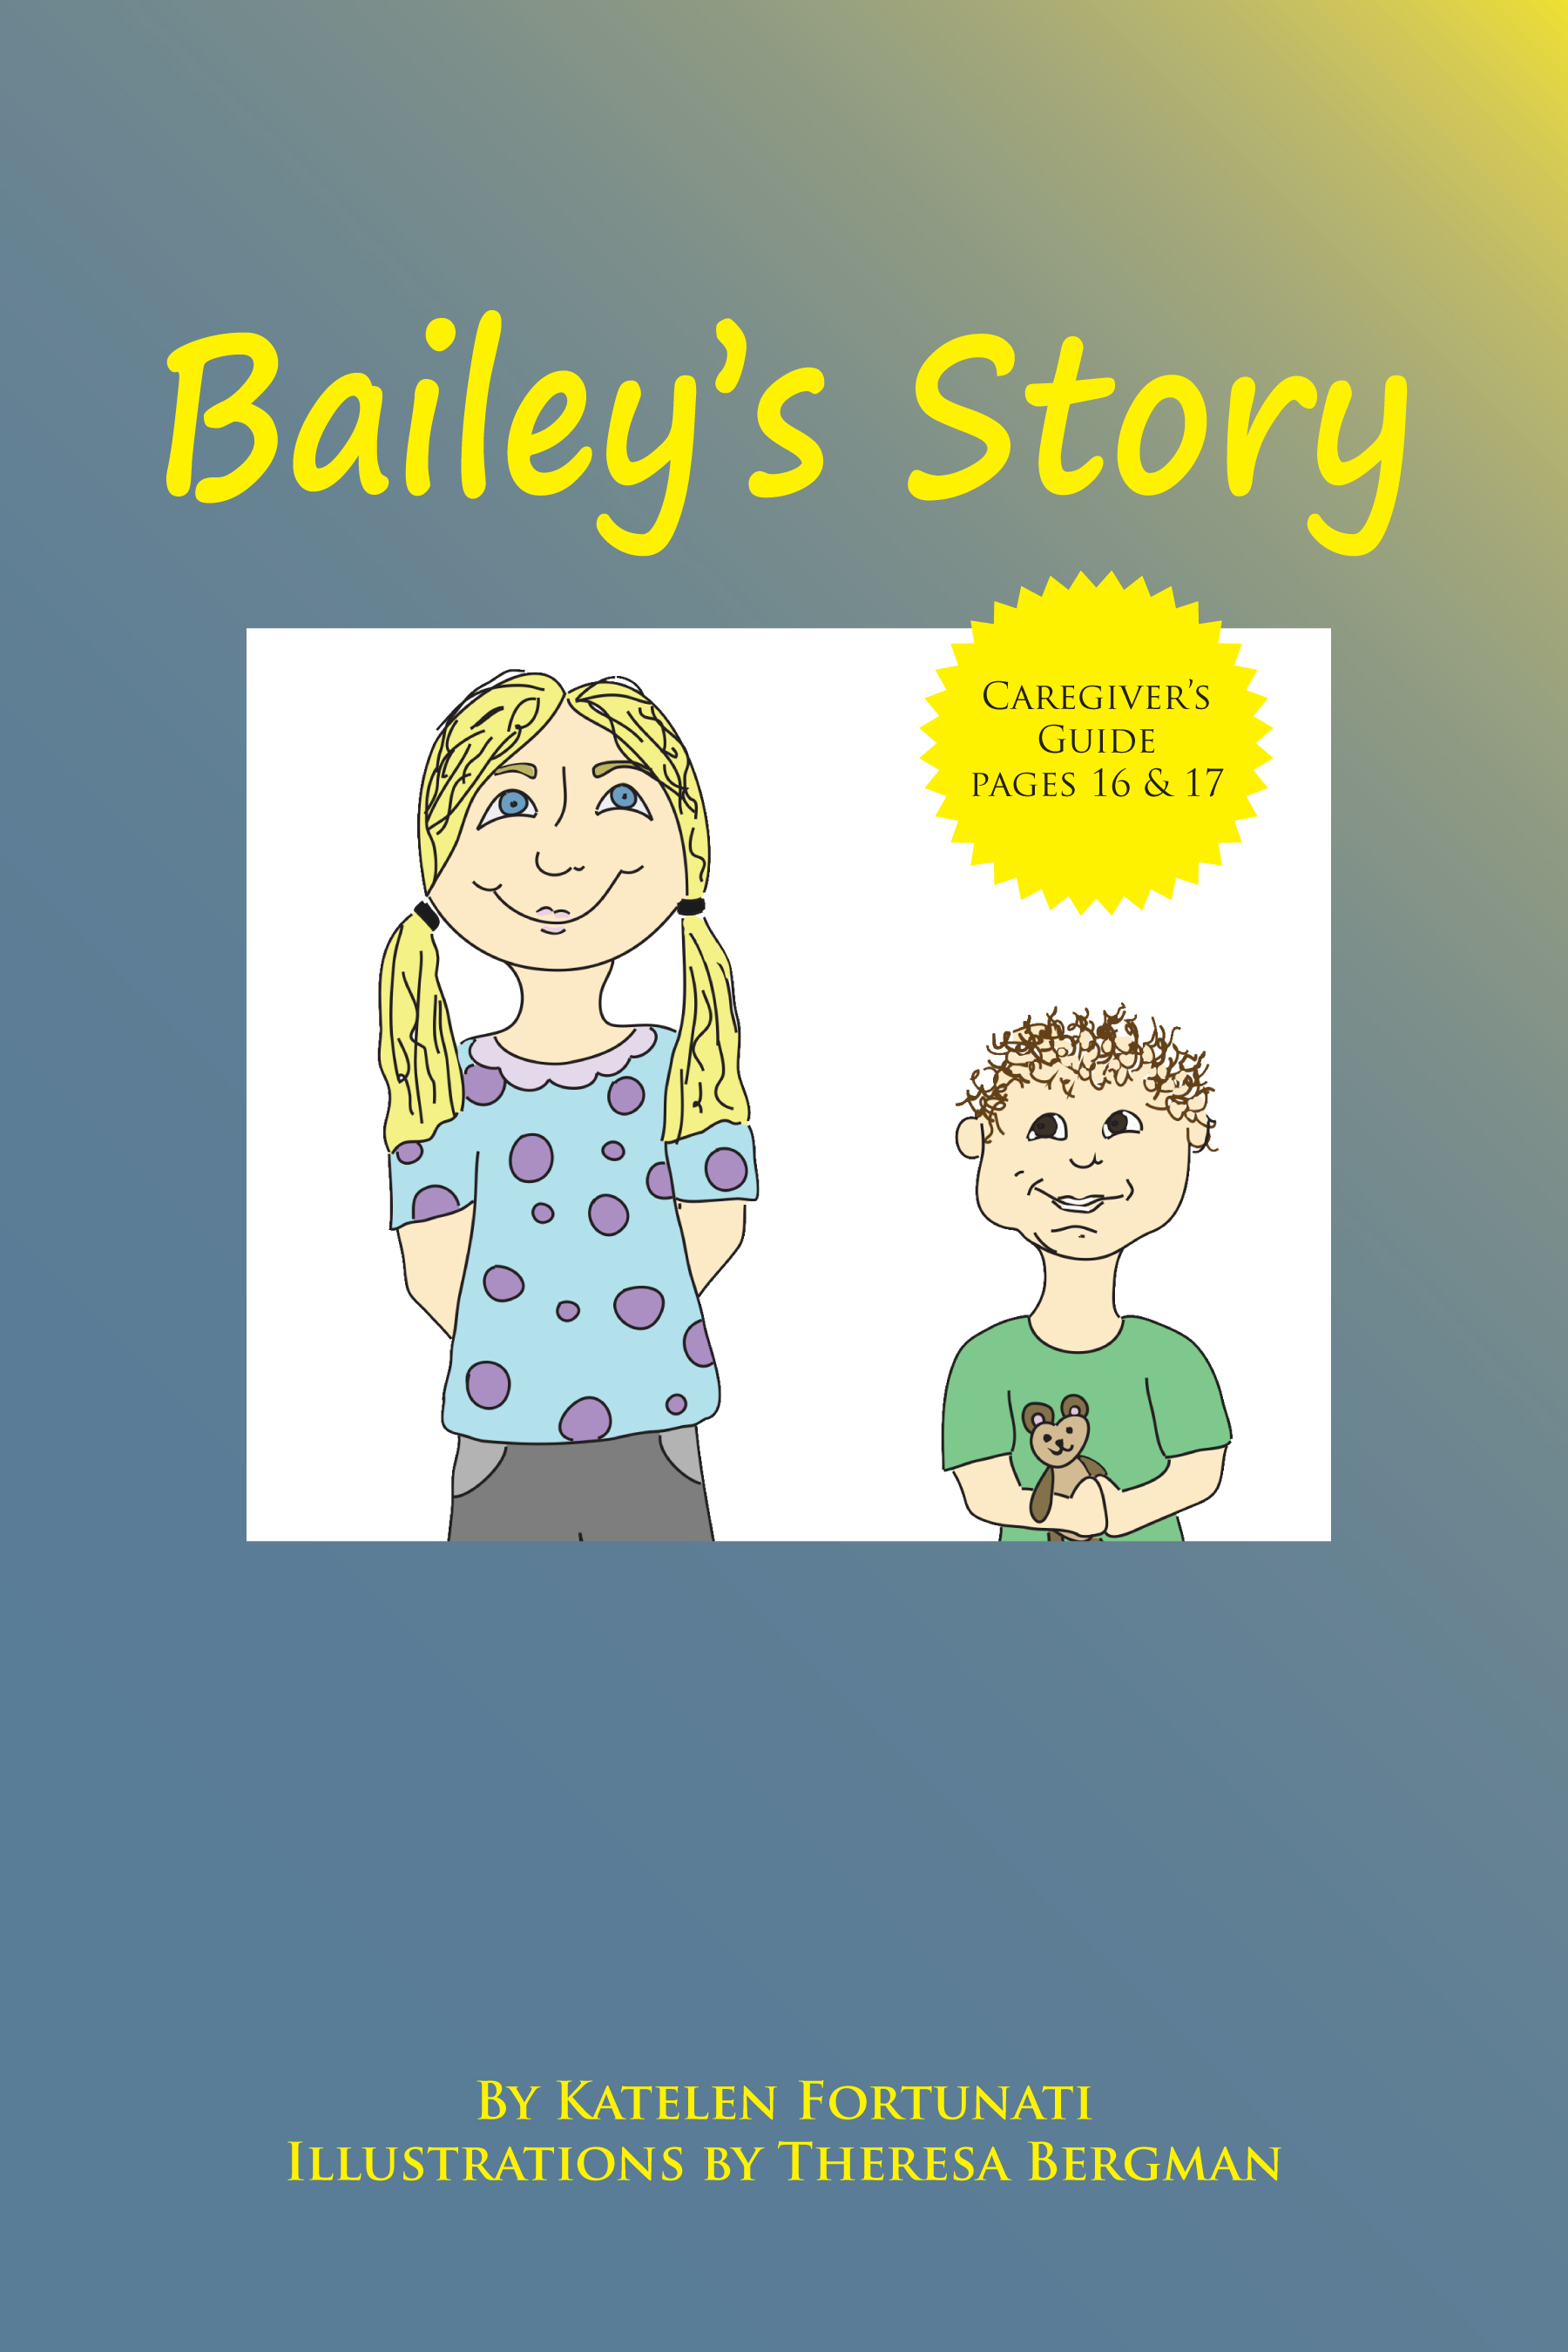 Bailey's Story - ChIPs Storybook PDF Download